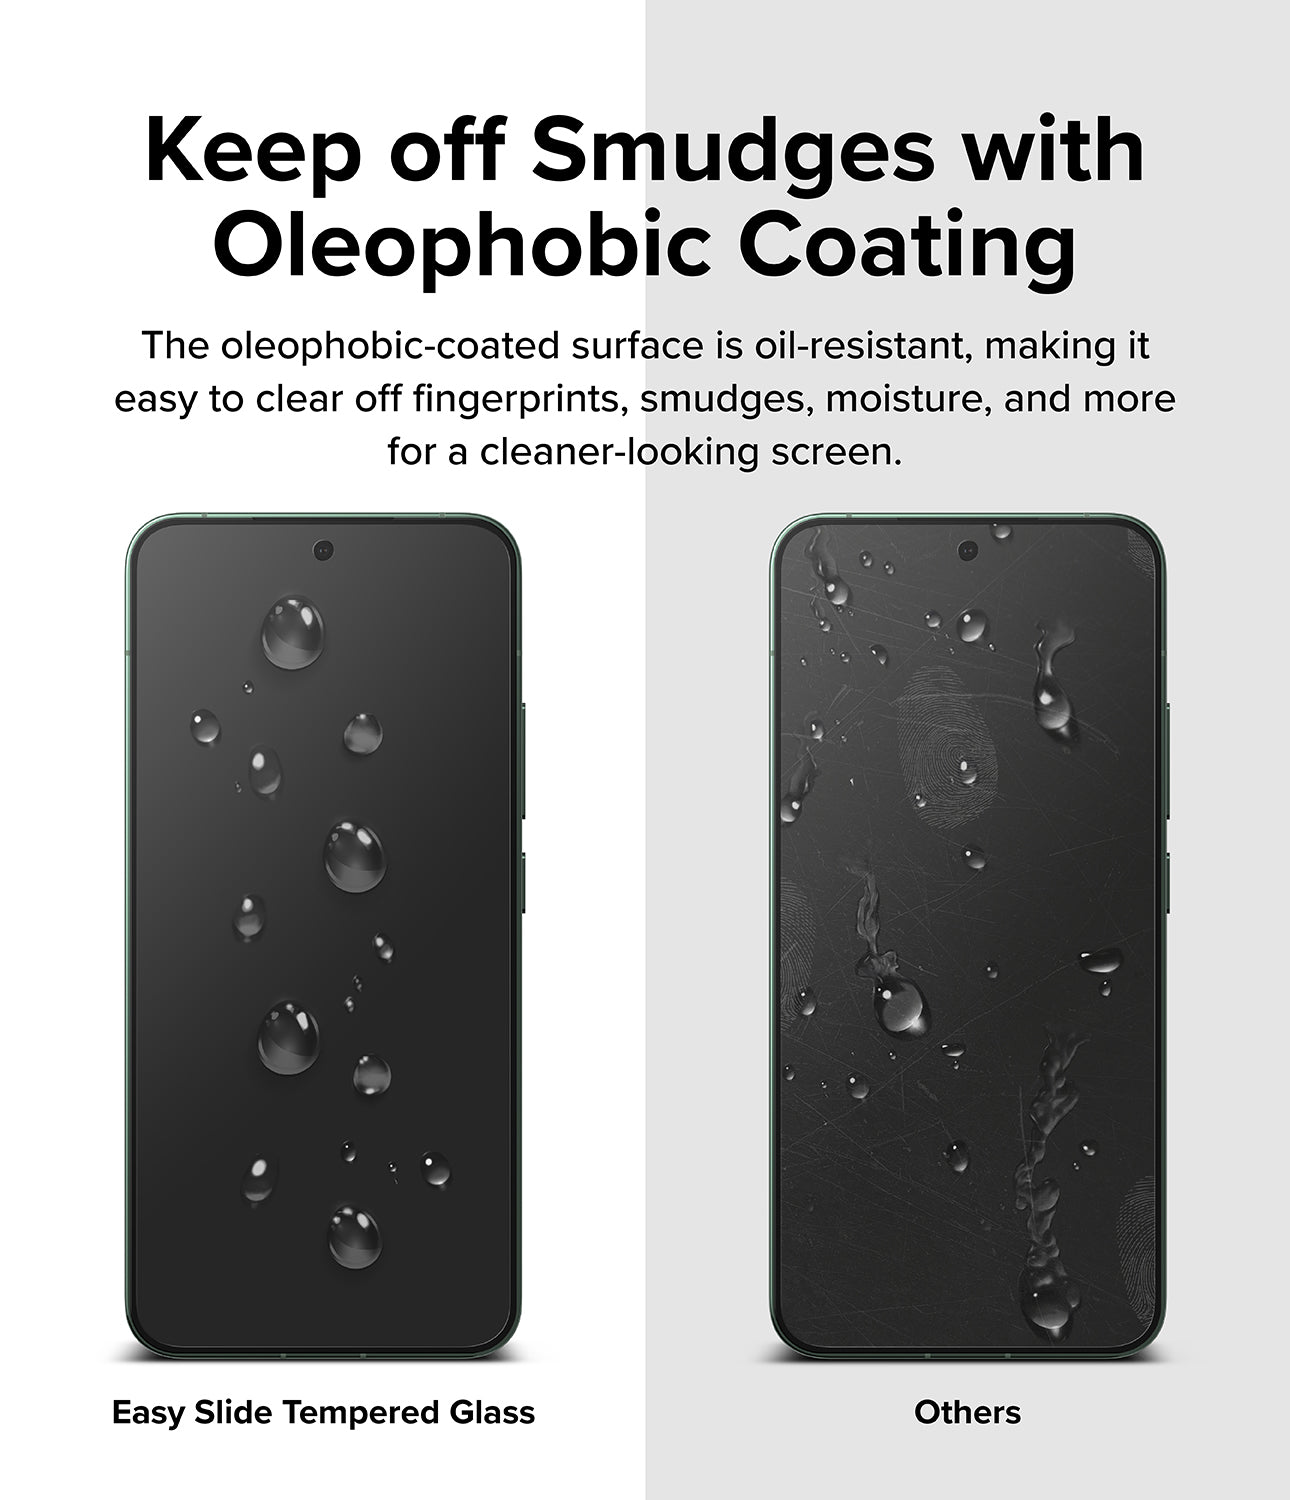 Xiaomi 14 Screen Protector | Easy Slide Tempered Glass - Keep off Smudges with Oleophobic Coating